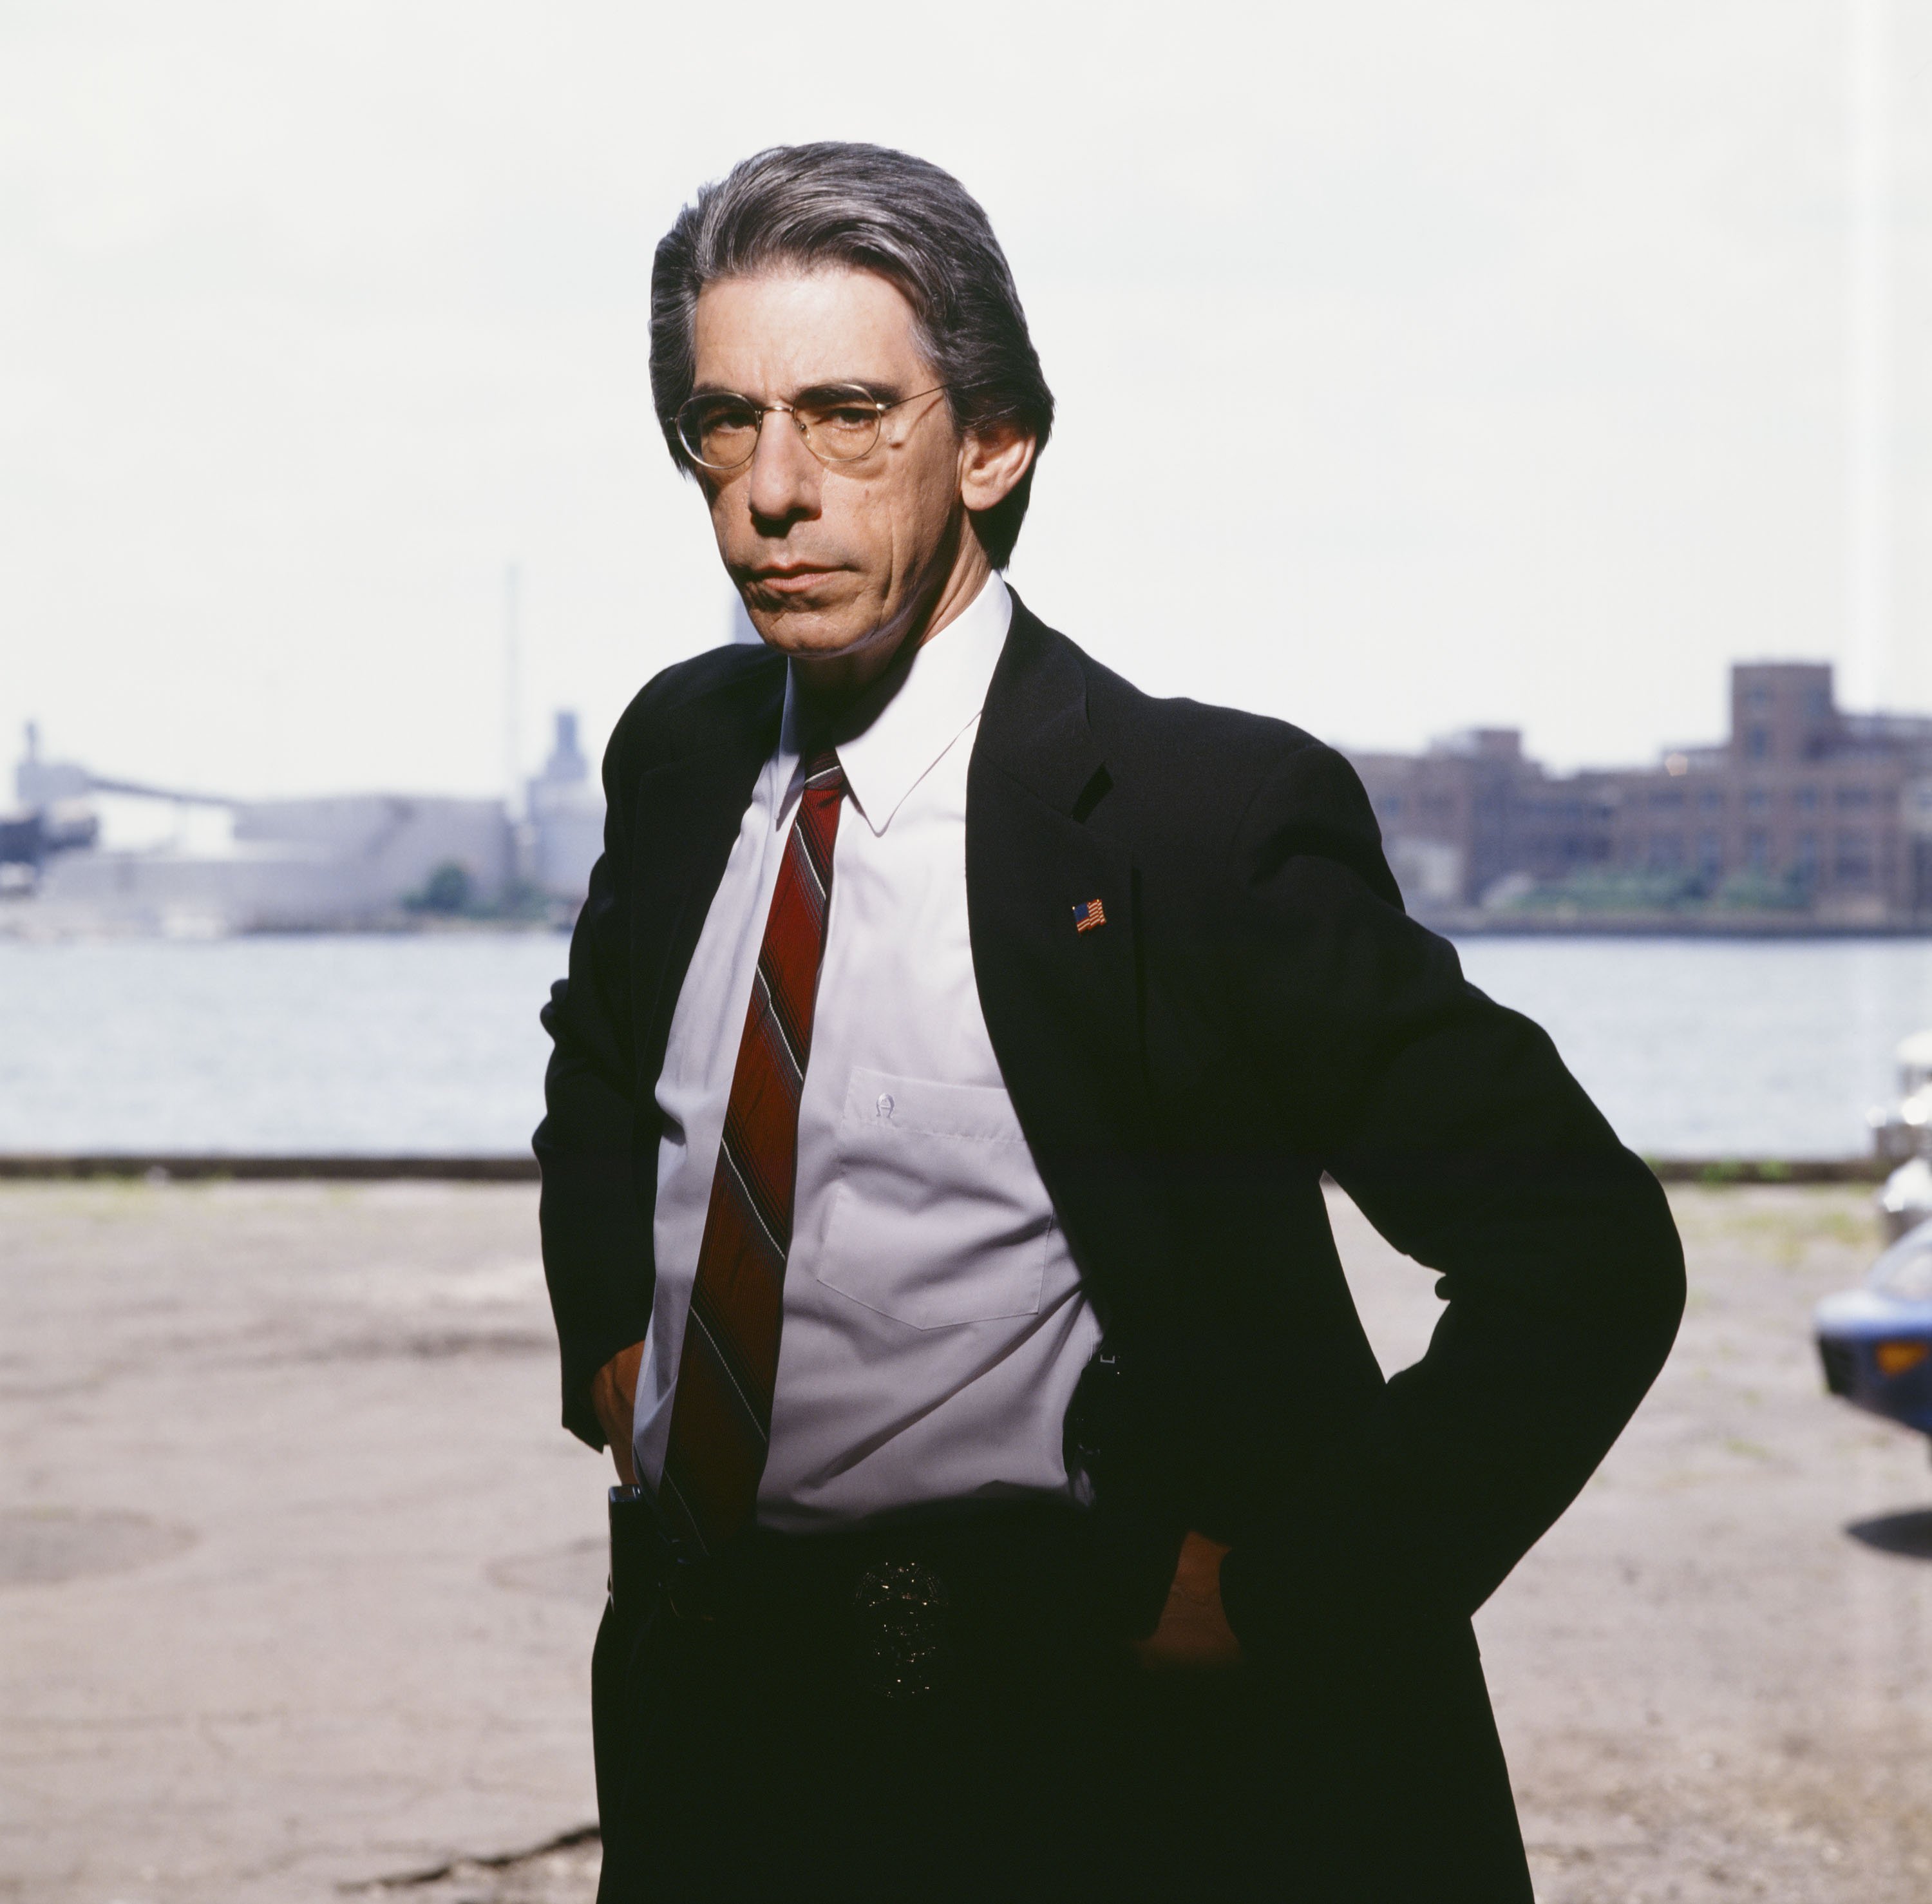 Richard Belzer in "Homicide: Life on the Street," 2010 | Source: Getty Images